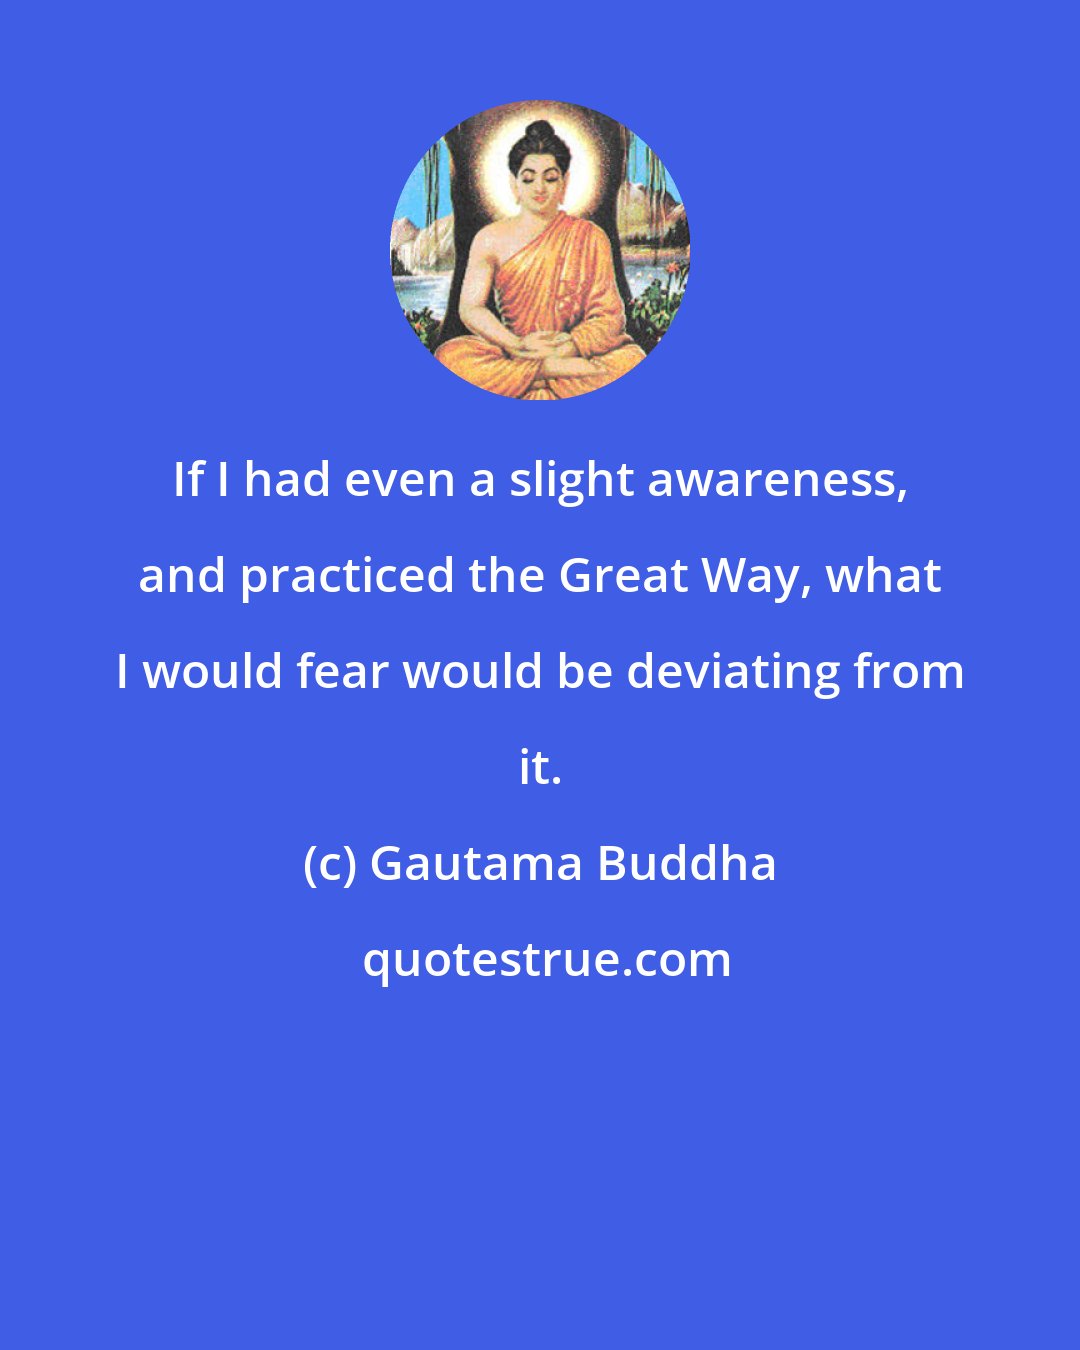 Gautama Buddha: If I had even a slight awareness, and practiced the Great Way, what I would fear would be deviating from it.